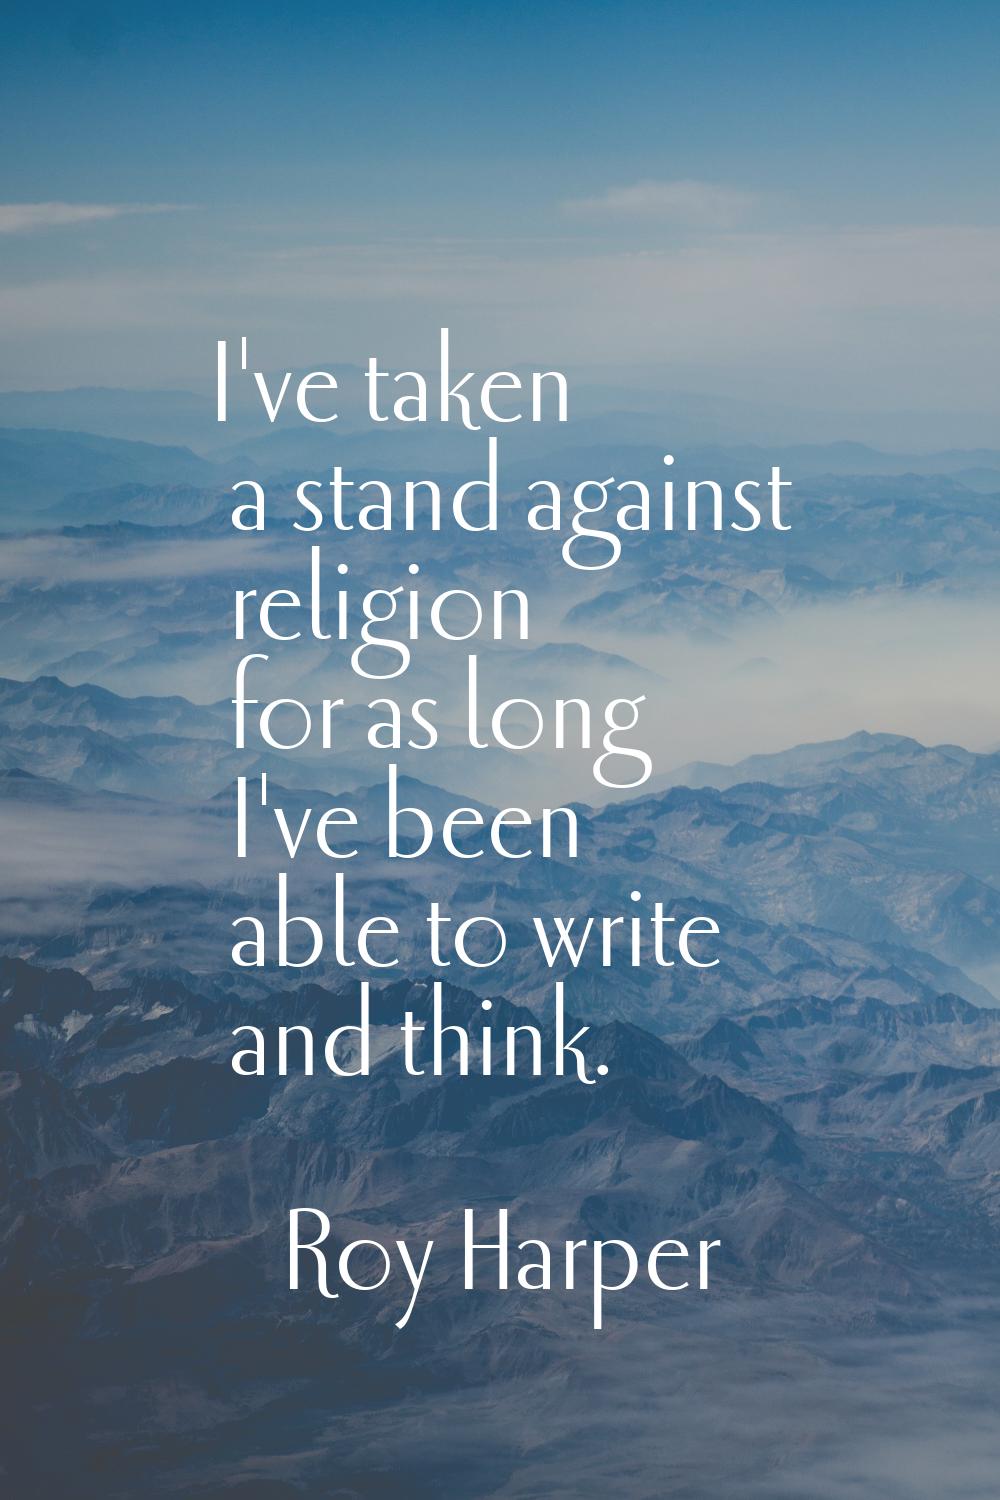 I've taken a stand against religion for as long I've been able to write and think.